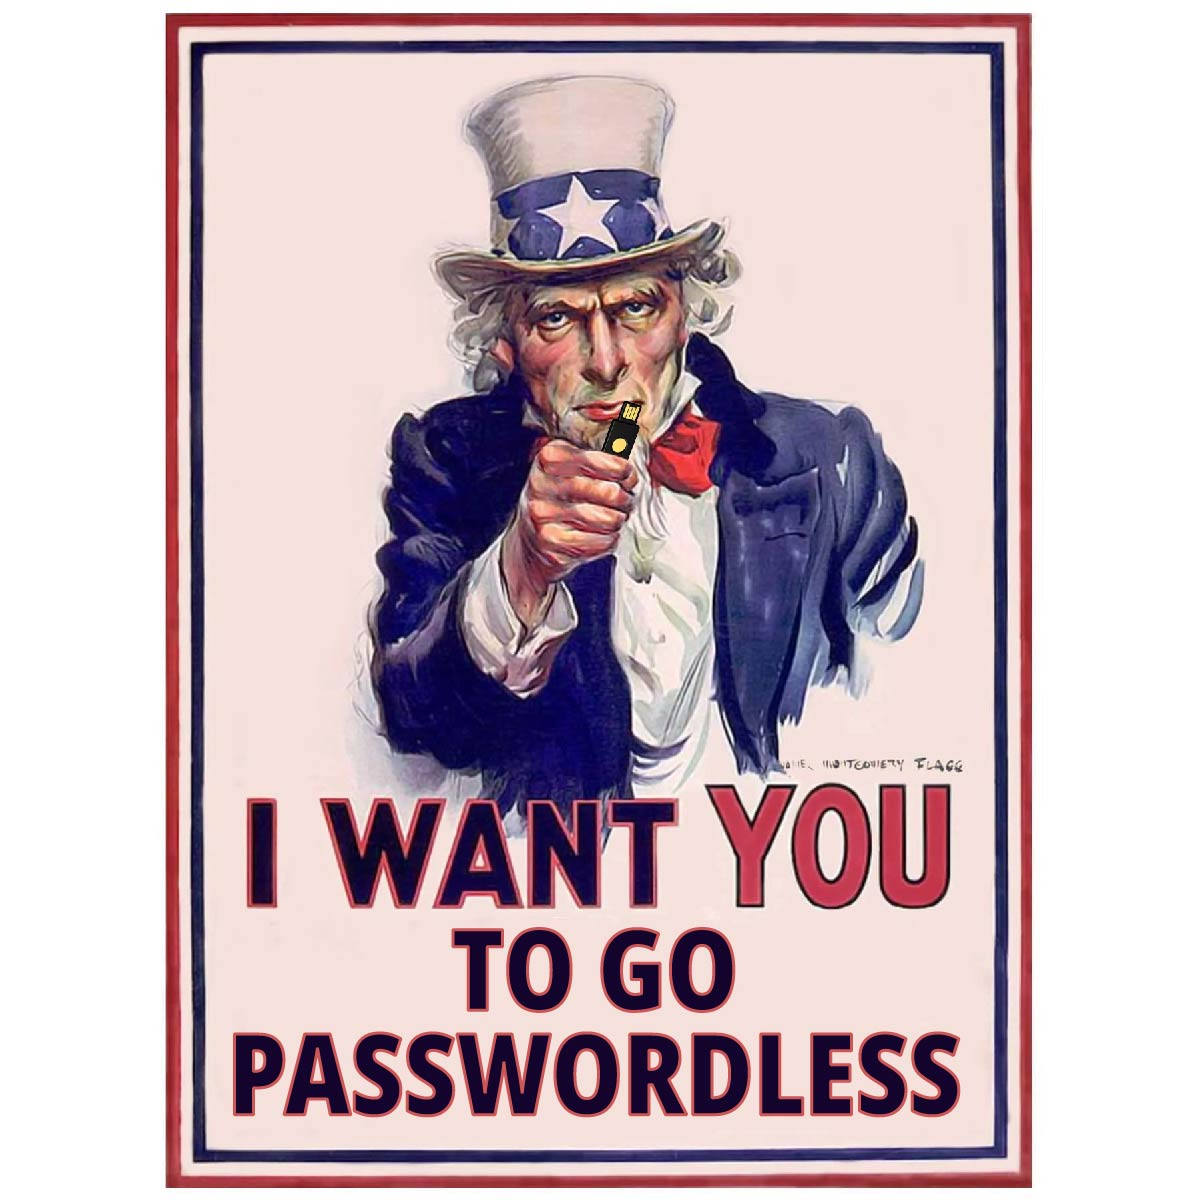 The US Government wants you to use phishing-resistant MFA and go passwordless Uncle Sam meme